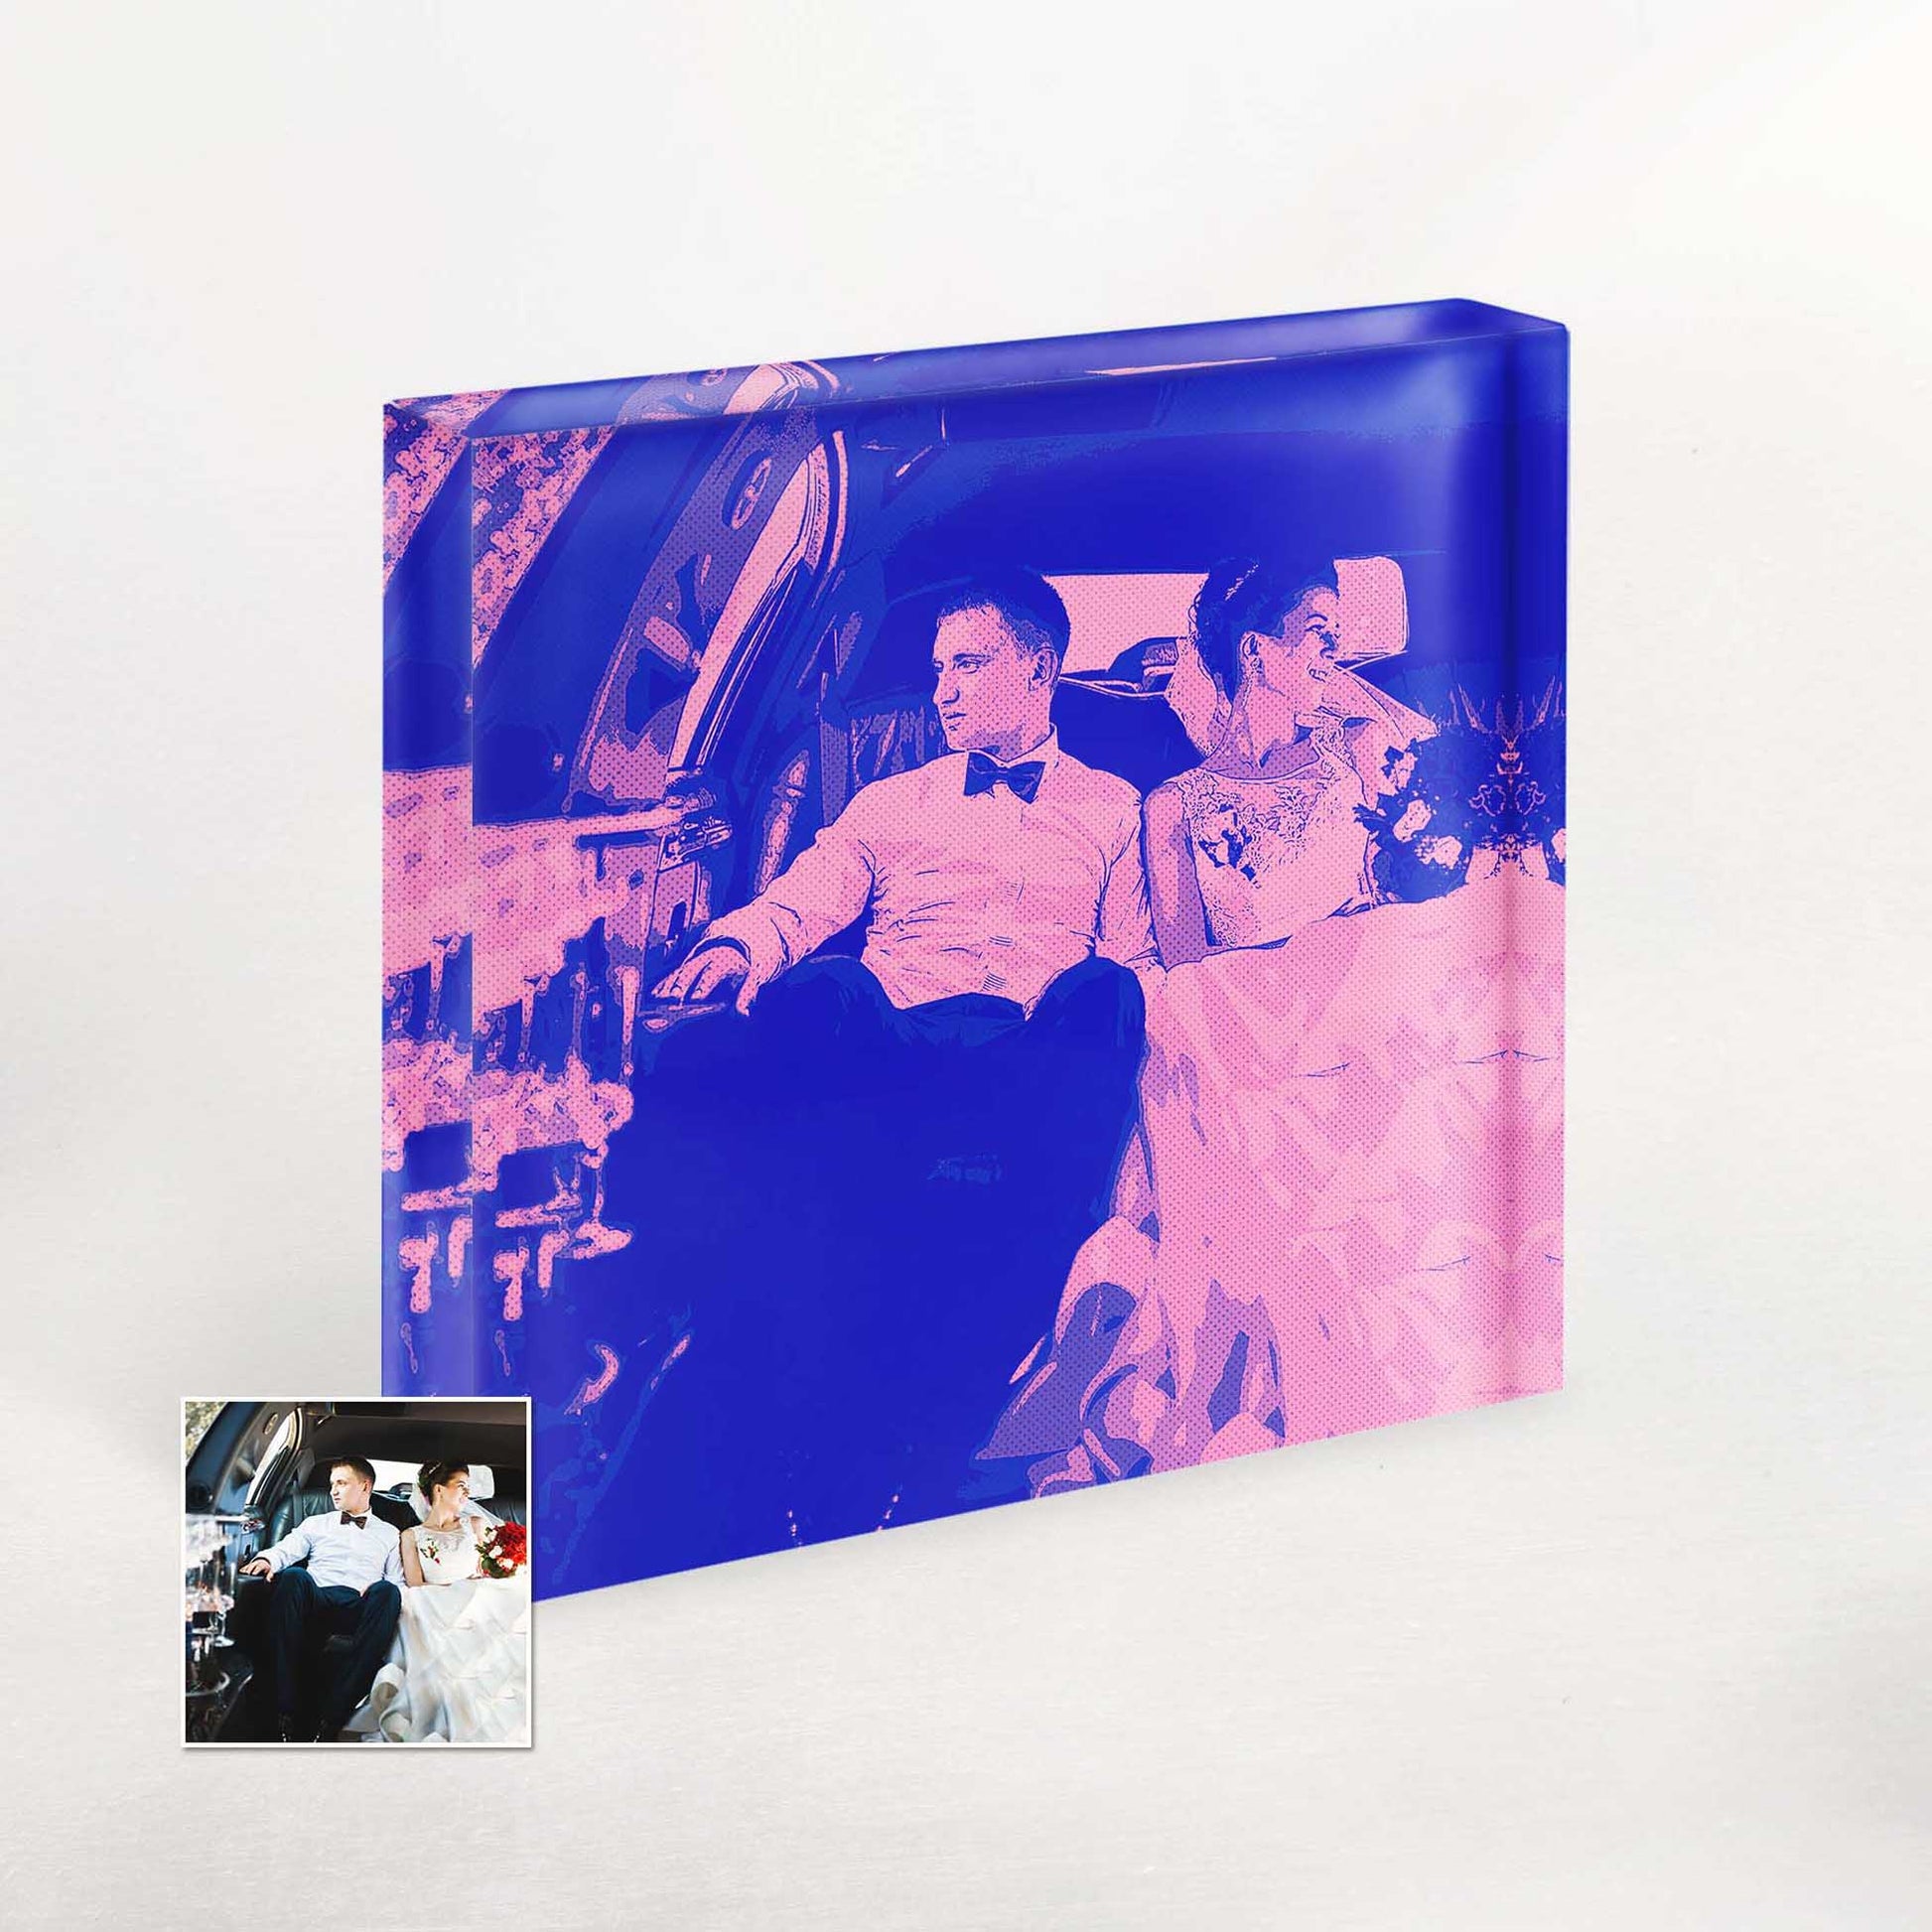 Elevate your decor with the whimsical charm of our Personalised Purple and Pink Comic Acrylic Block Photo. Its cool comic cartoon style and vibrant colors create a trendy and unique visual experience, making it an original and hip addition to your space.